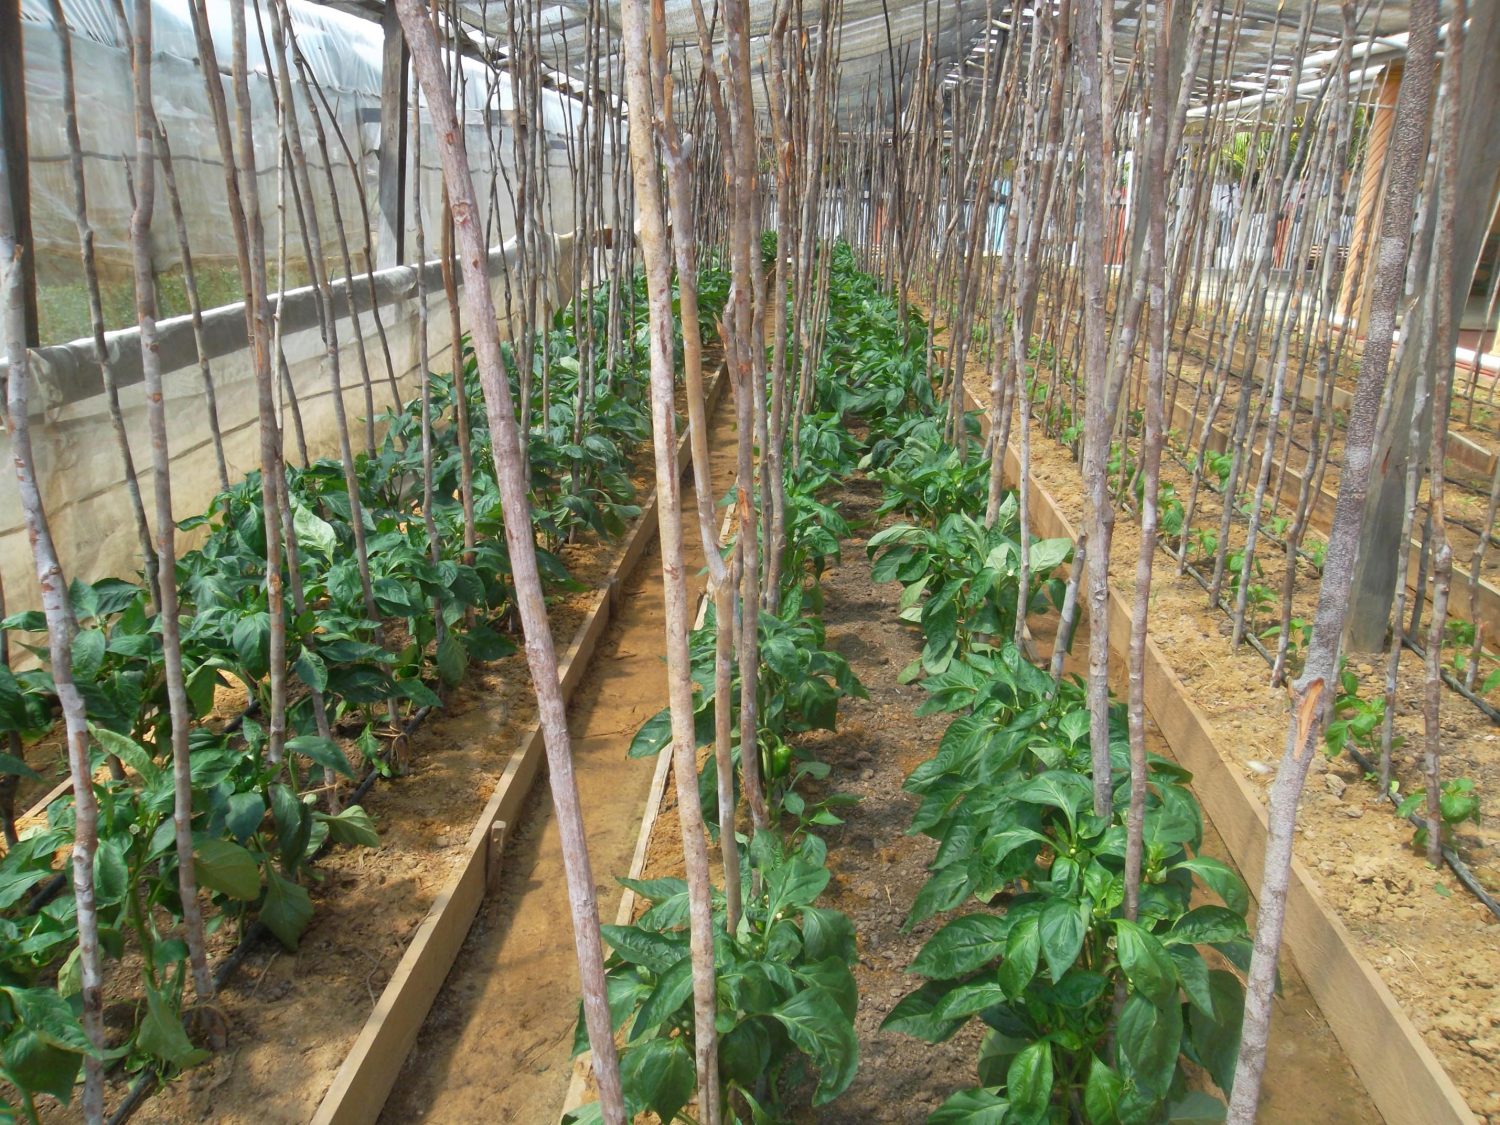 Sweet peppers under cultivation